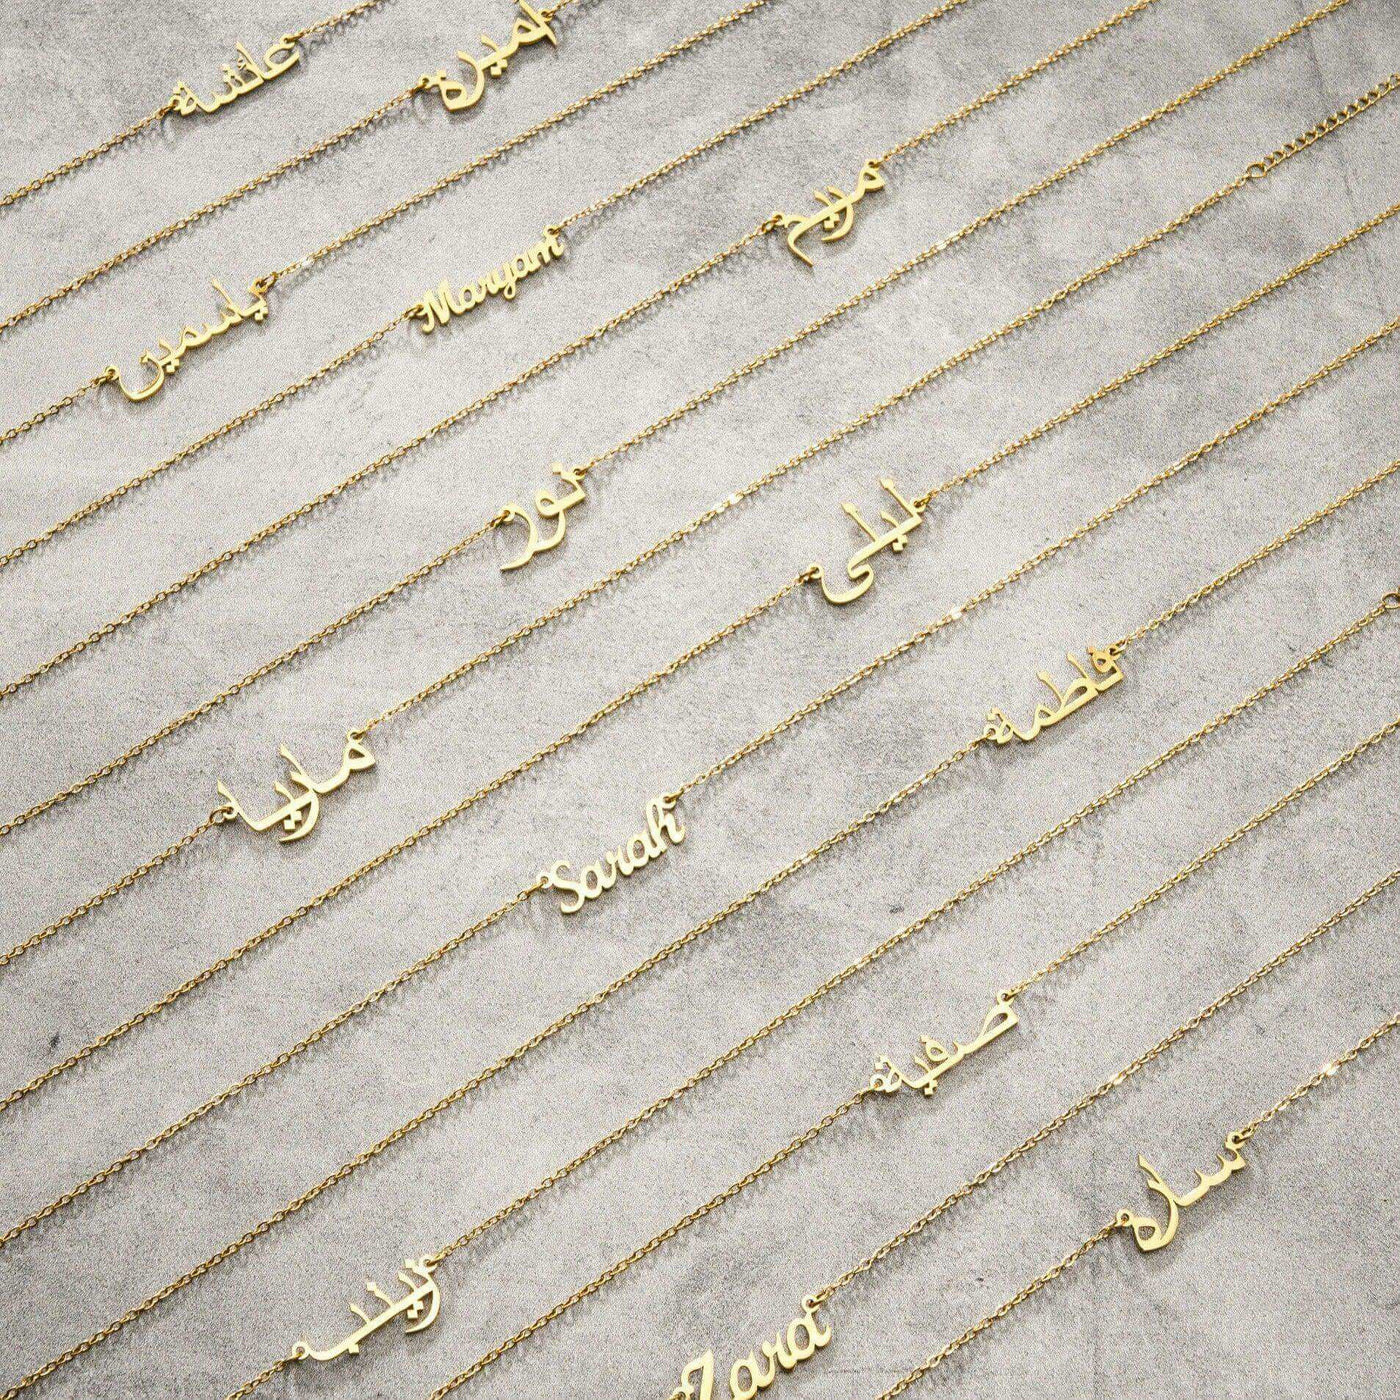 All-14-name-necklaces---SIDE_1